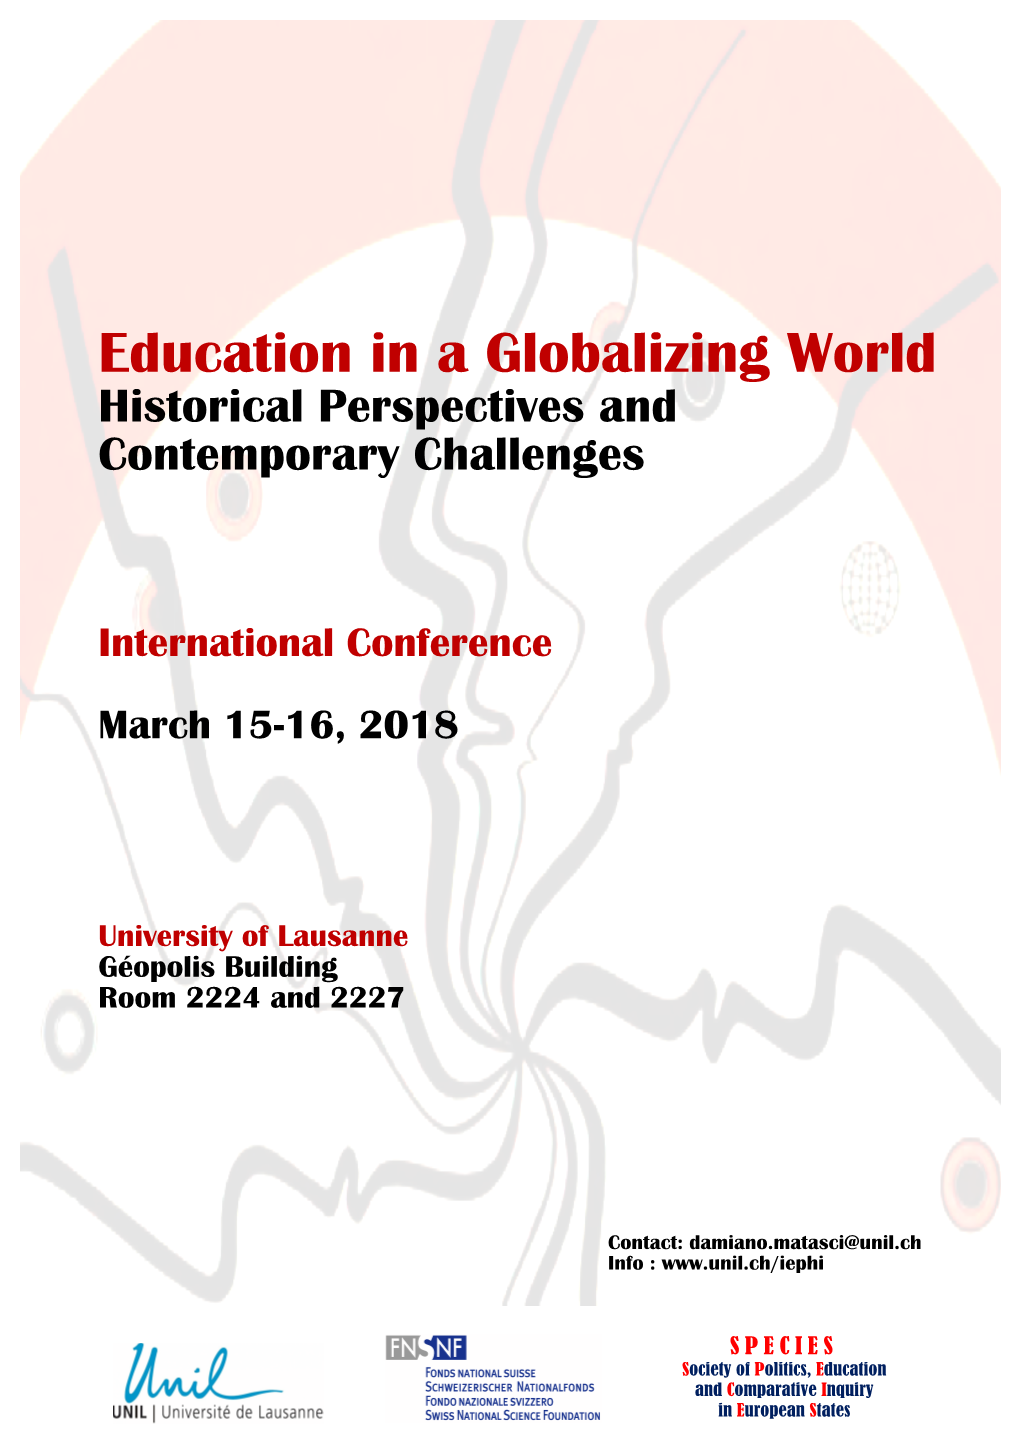 Education in a Globalizing World Historical Perspectives and Contemporary Challenges